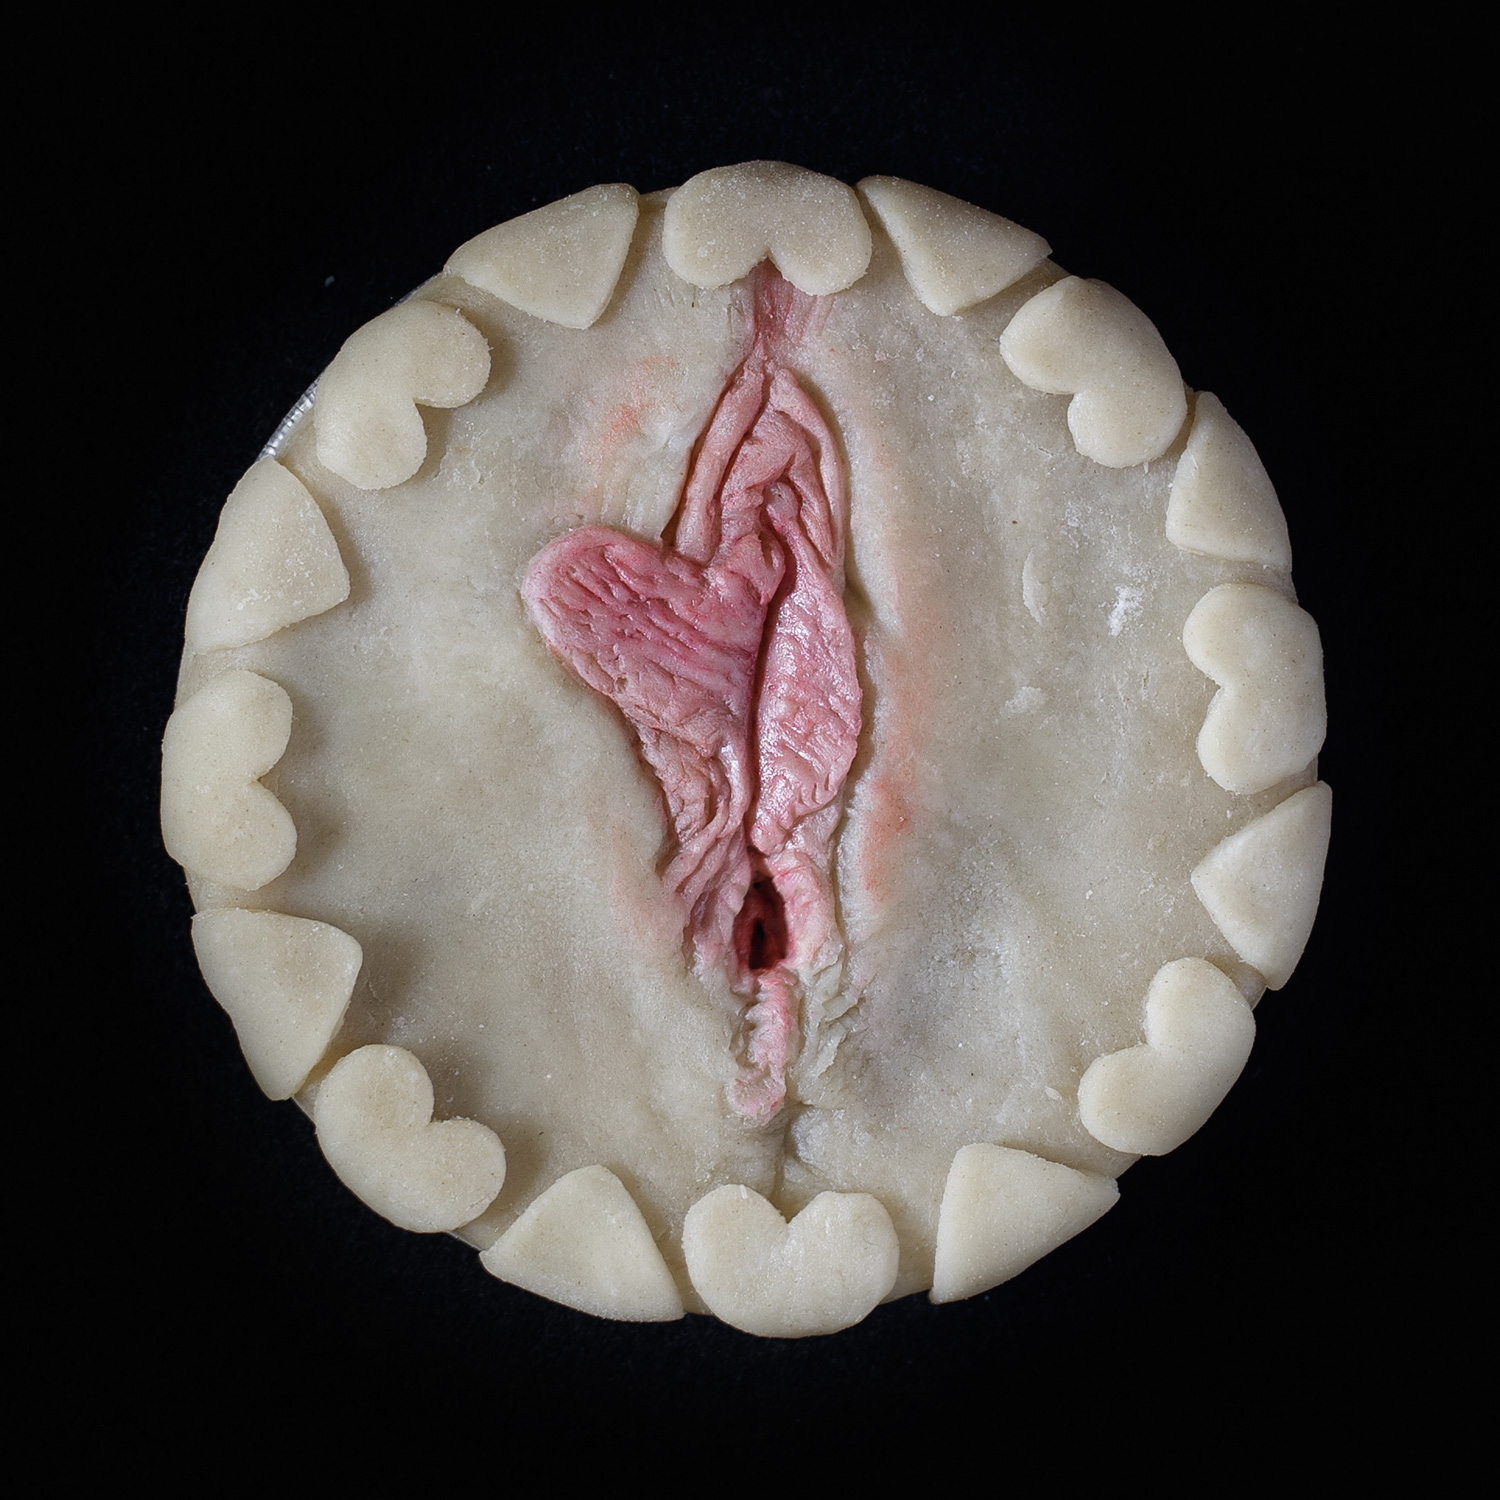 Unbaked pie decorated with hand-sculpted vulva art on a black background 